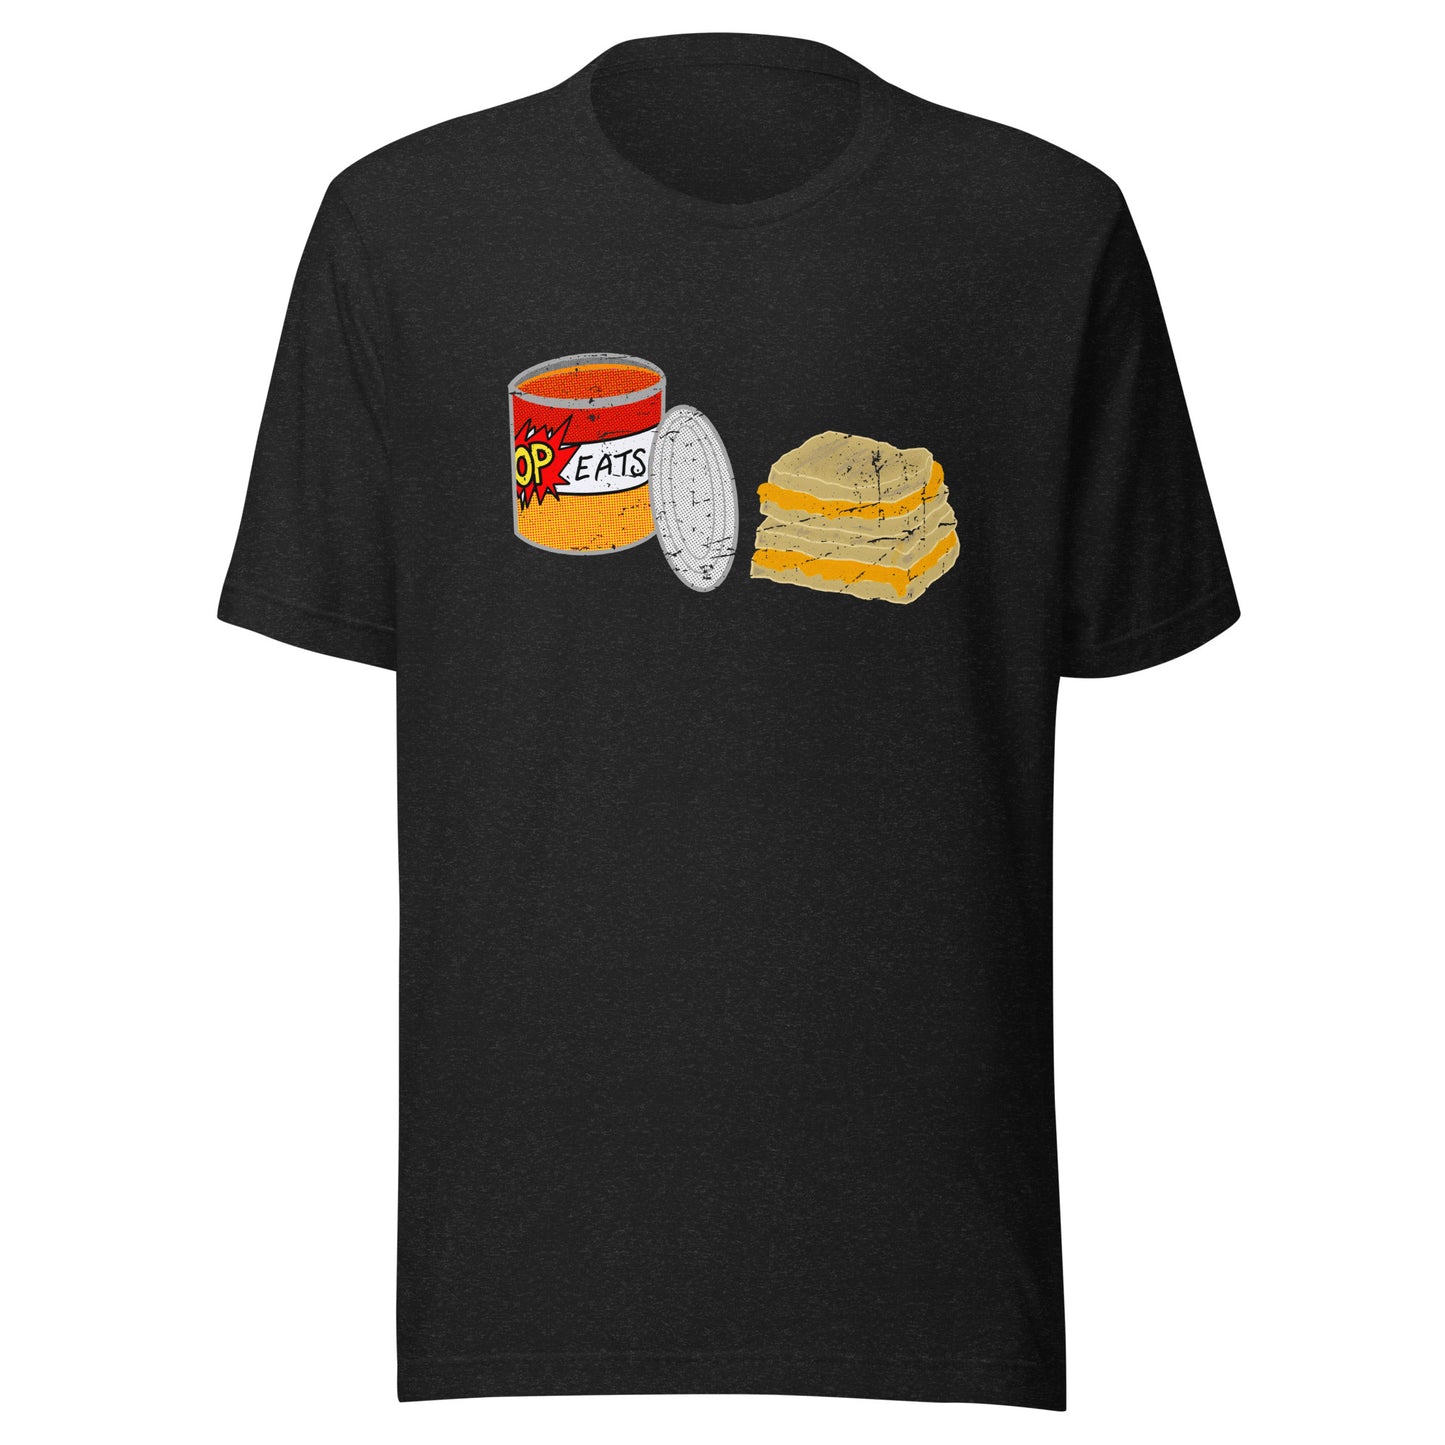 Tomato Soup & Grilled Cheese Tee